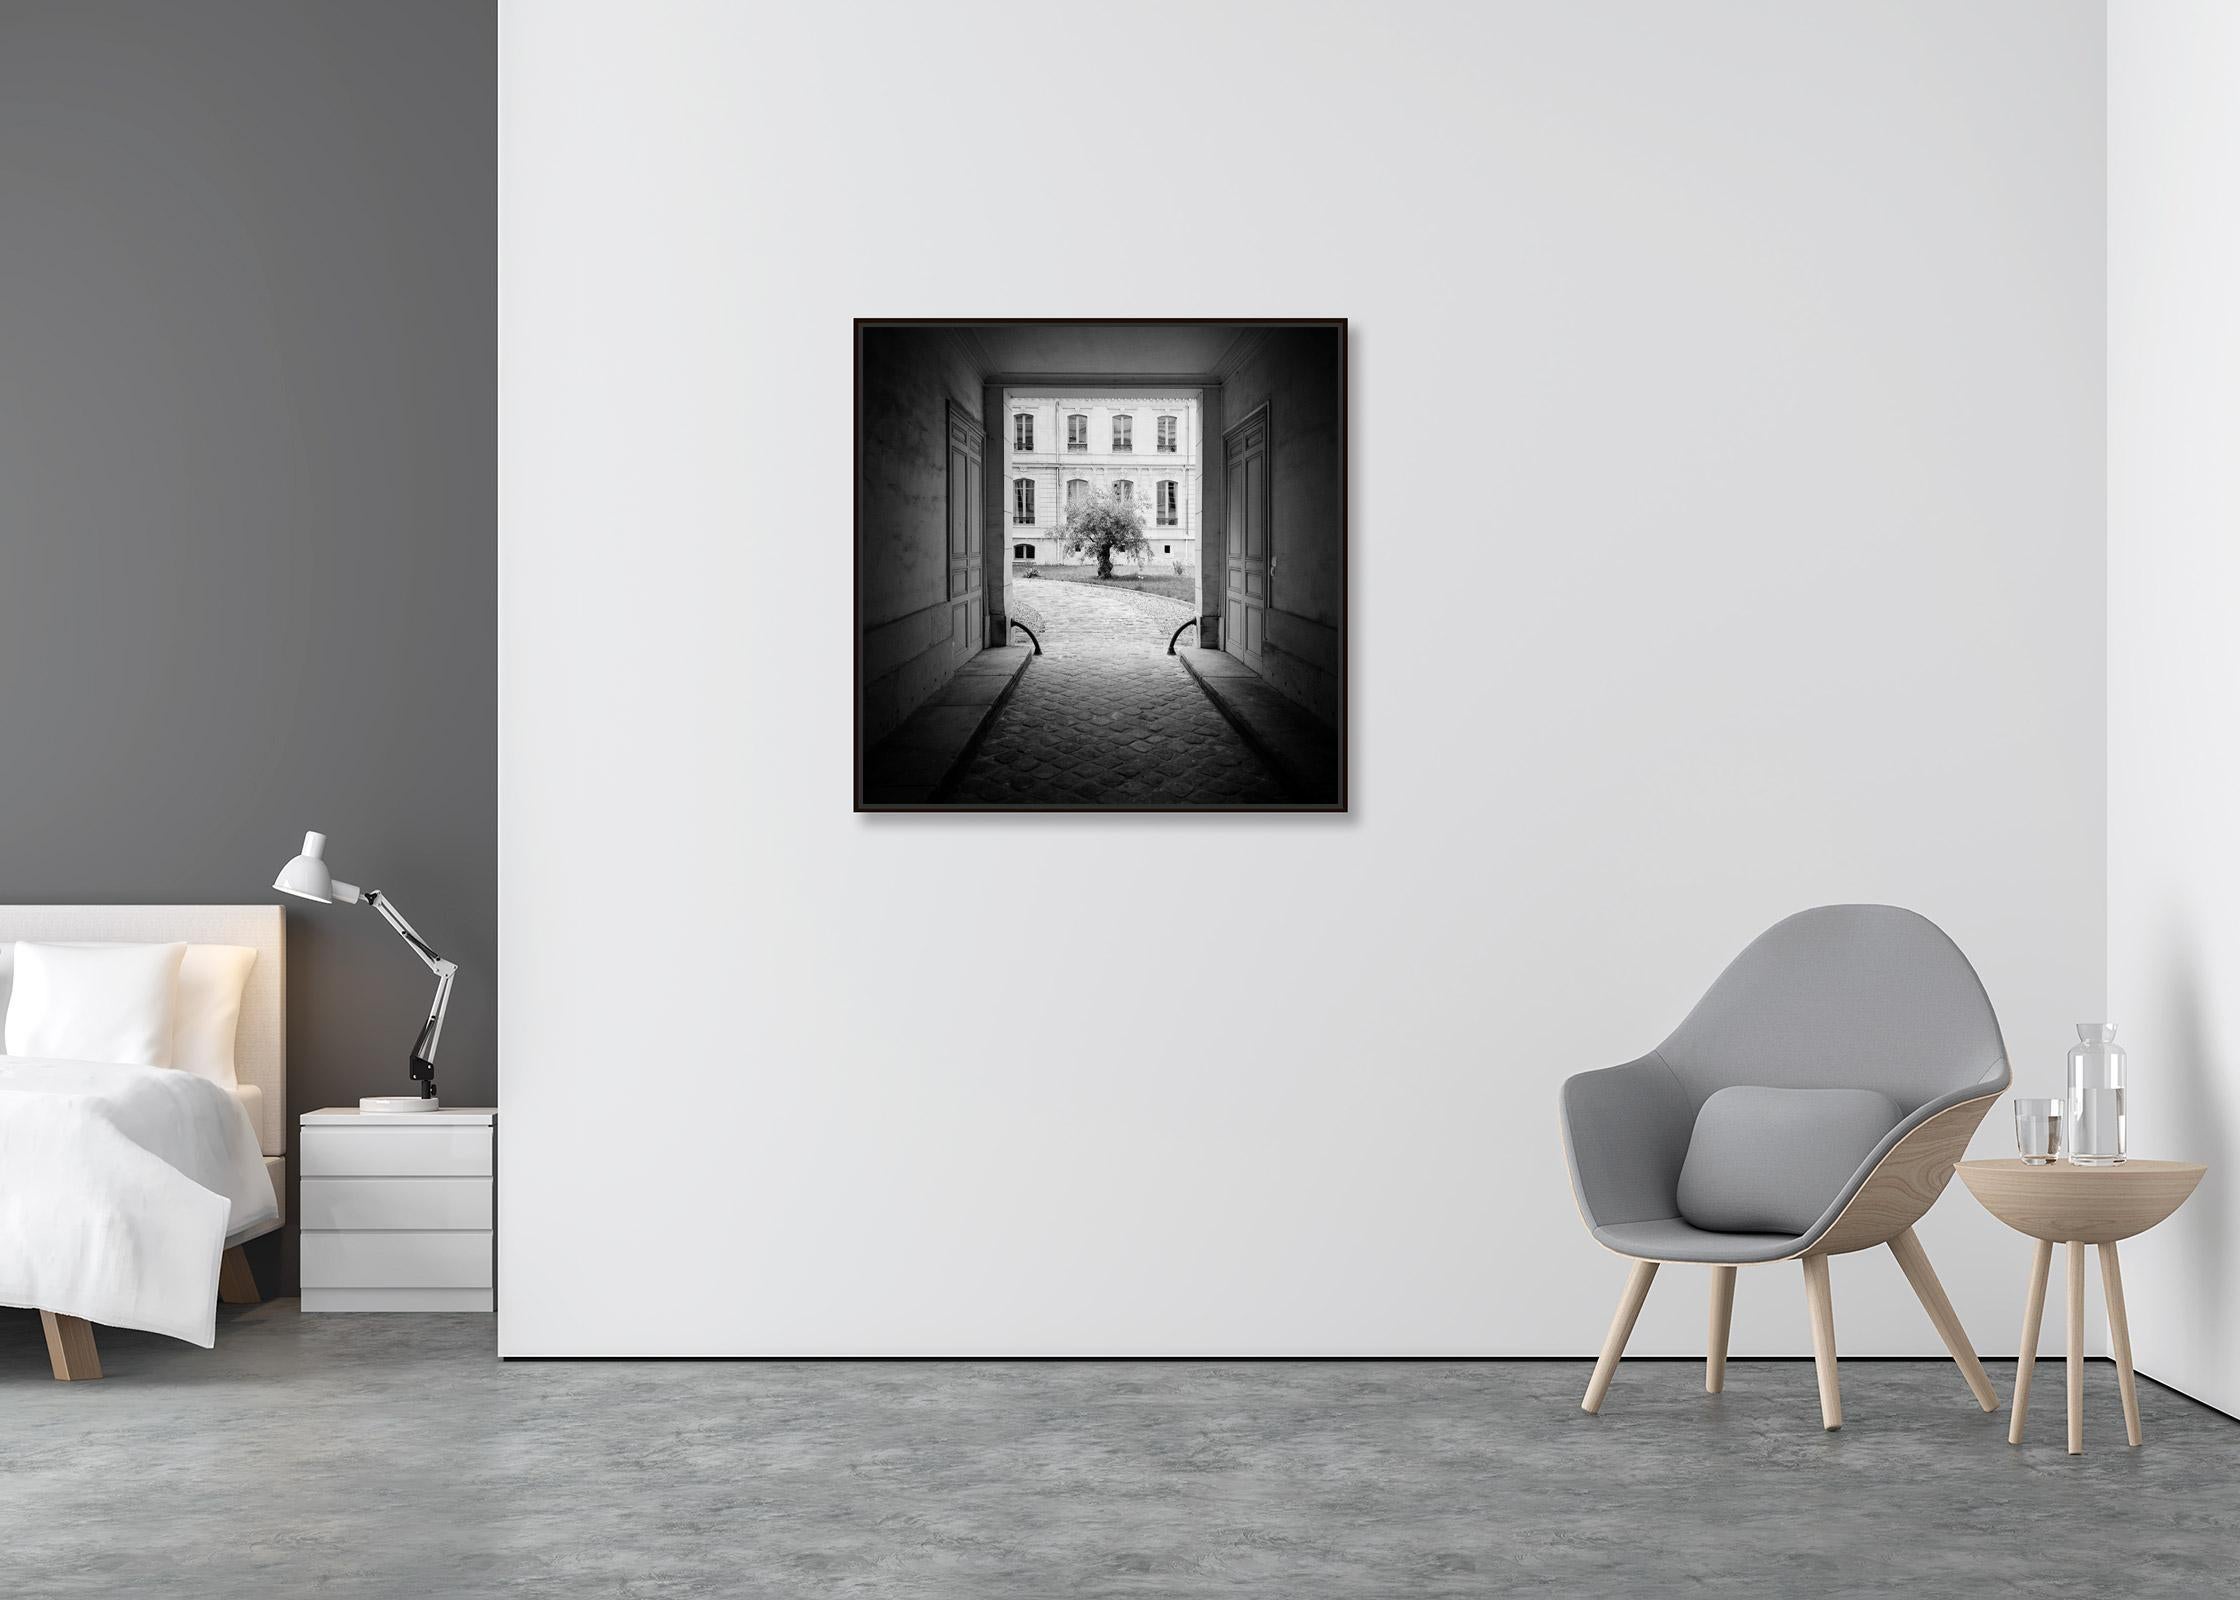 Tree in the Courtyard Paris black white fine art cityscape photography print - Contemporary Photograph by Gerald Berghammer, Ina Forstinger